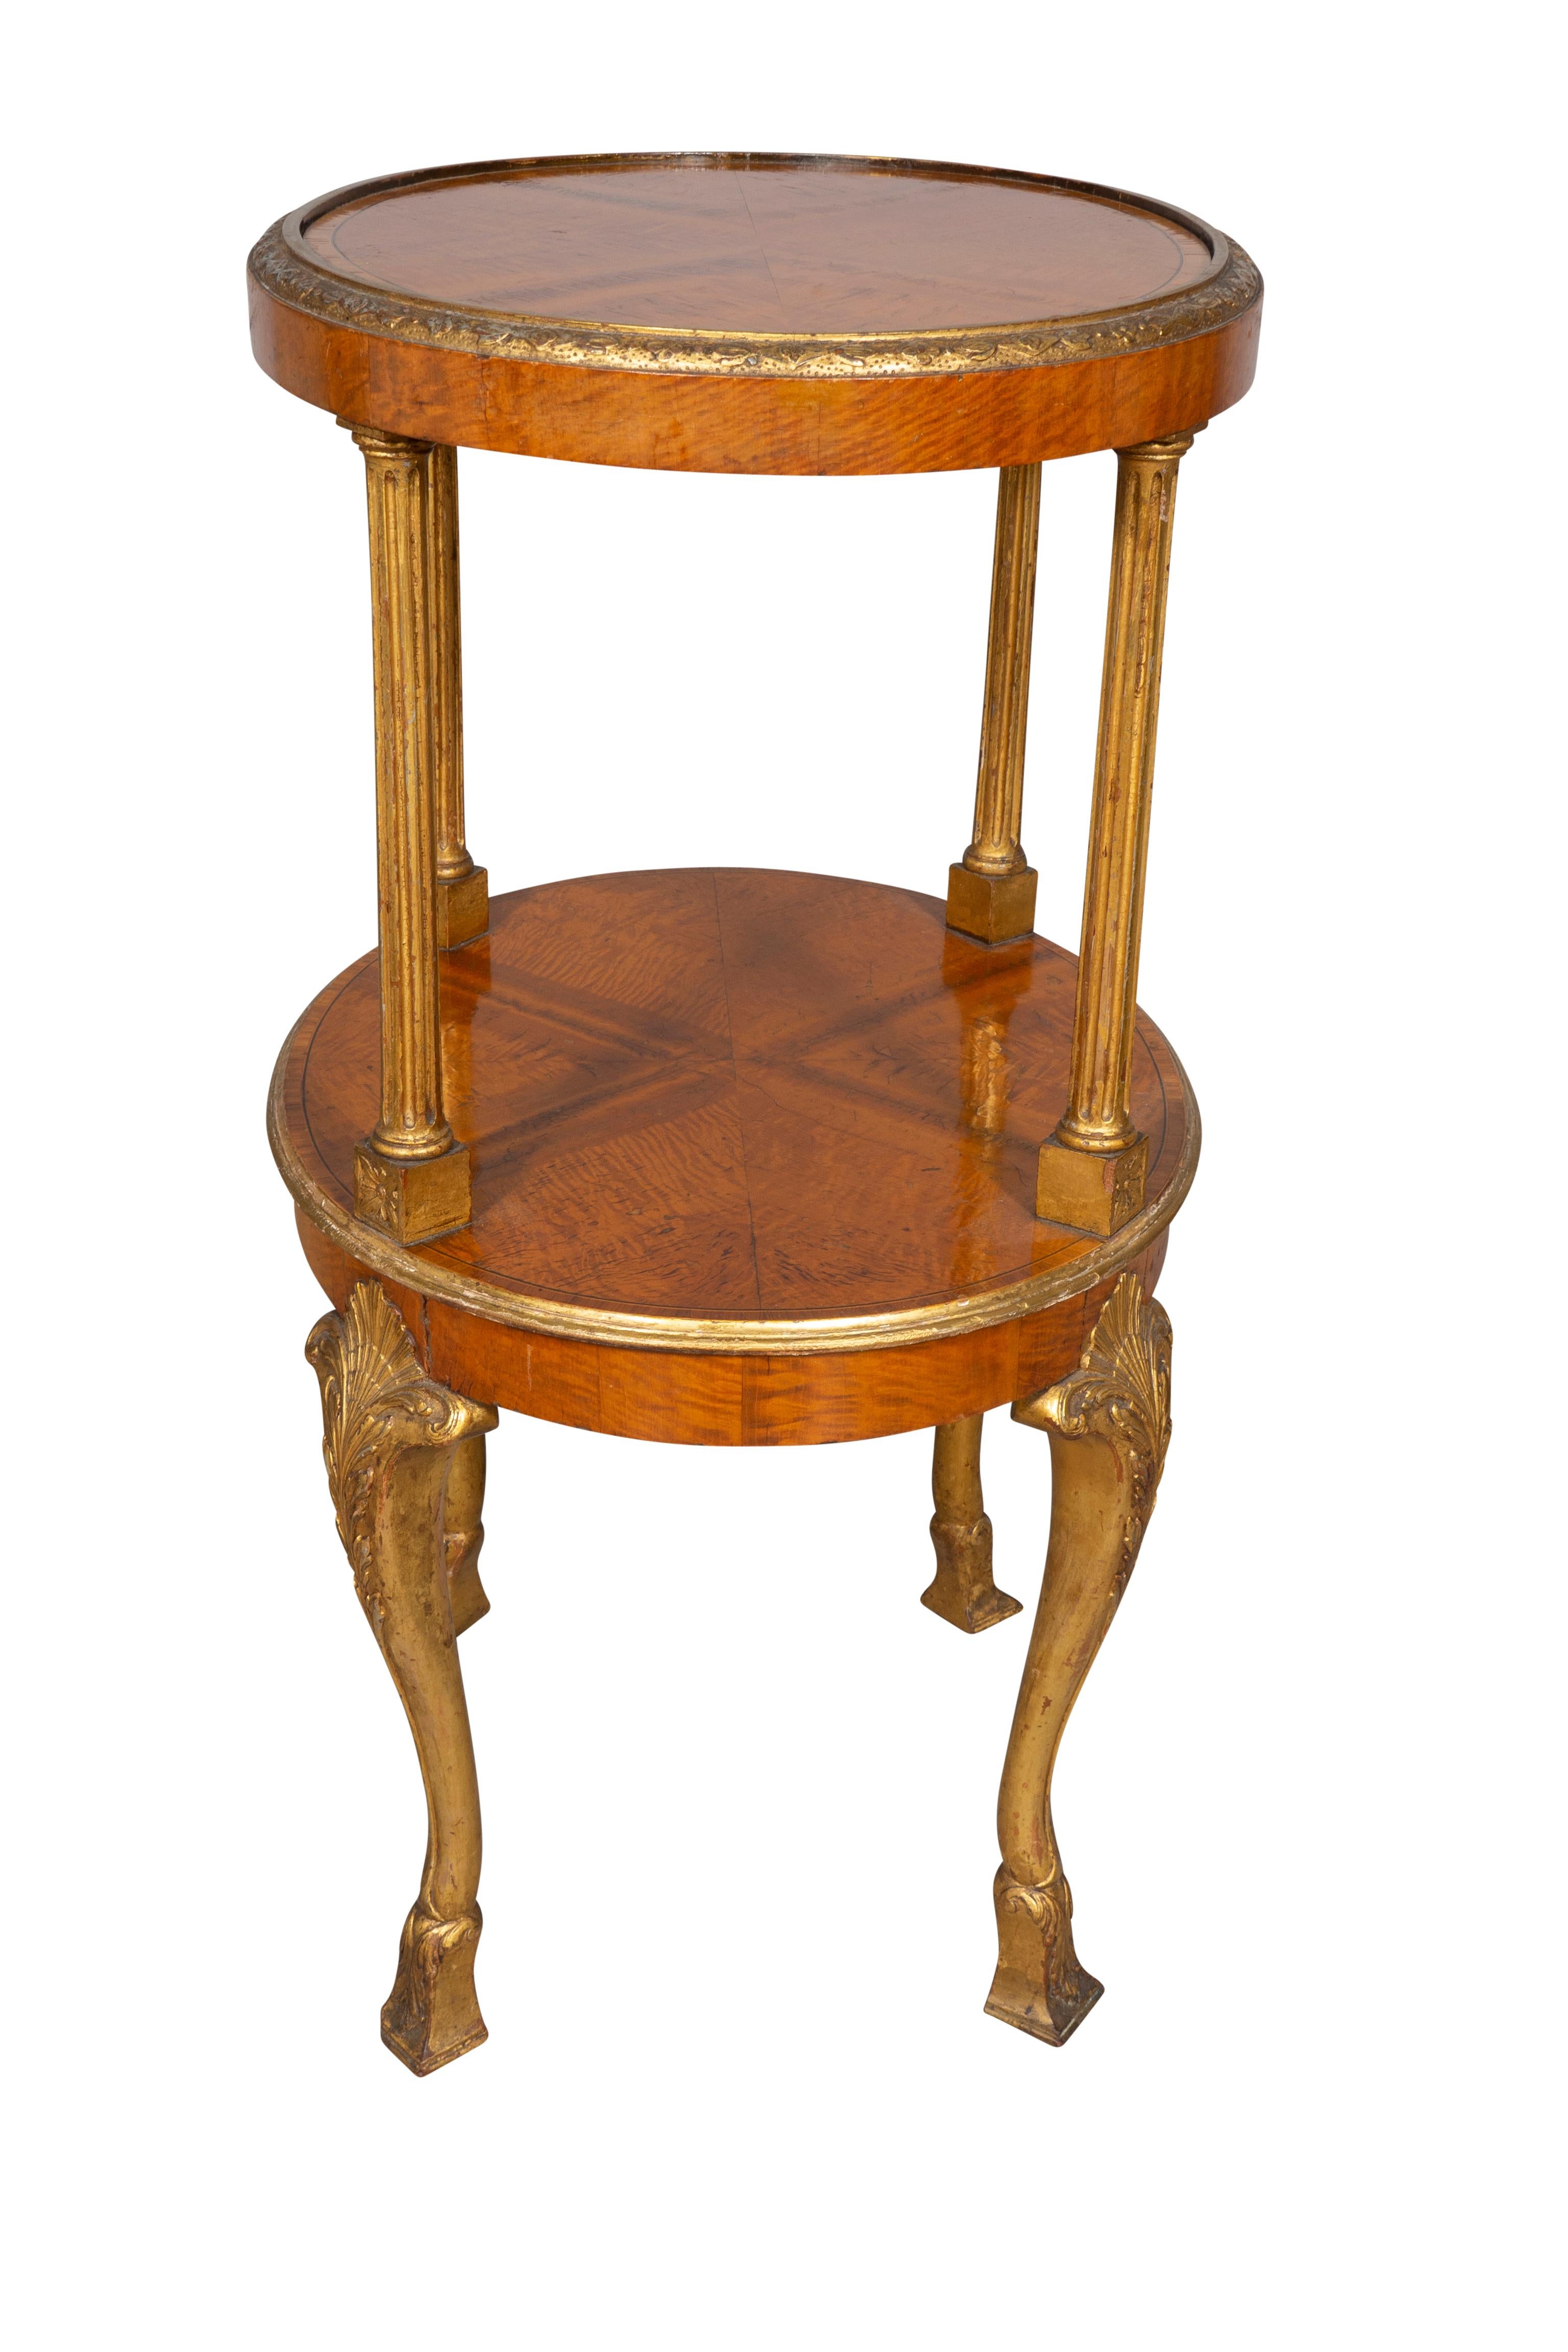 George I Edwardian Satinwood and Gilded Table For Sale